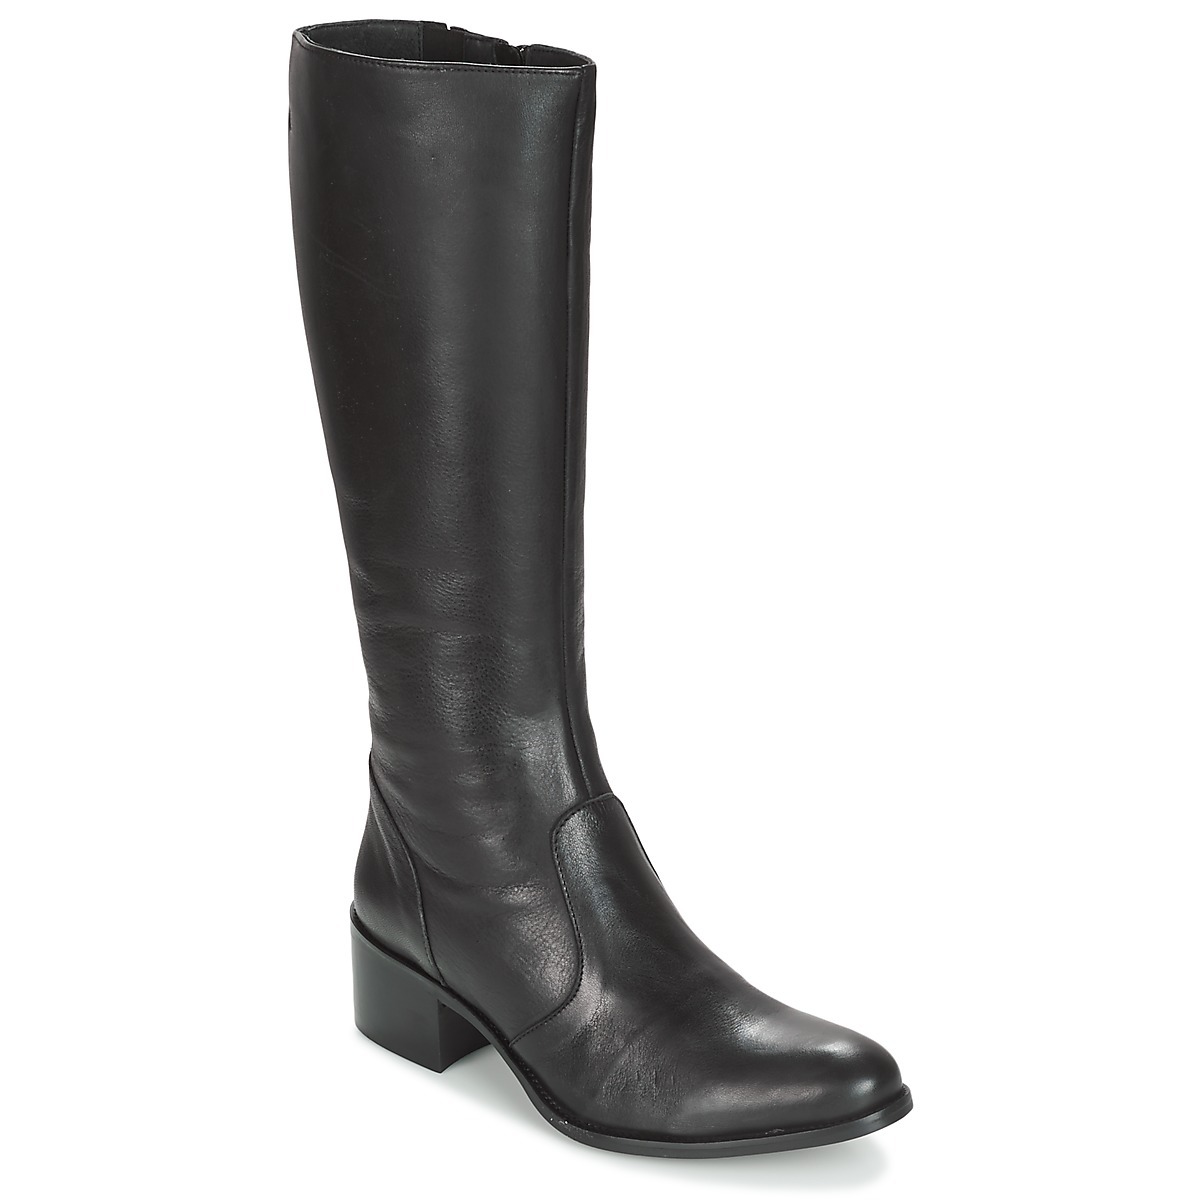 Boots in Black at Spartoo GOOFASH